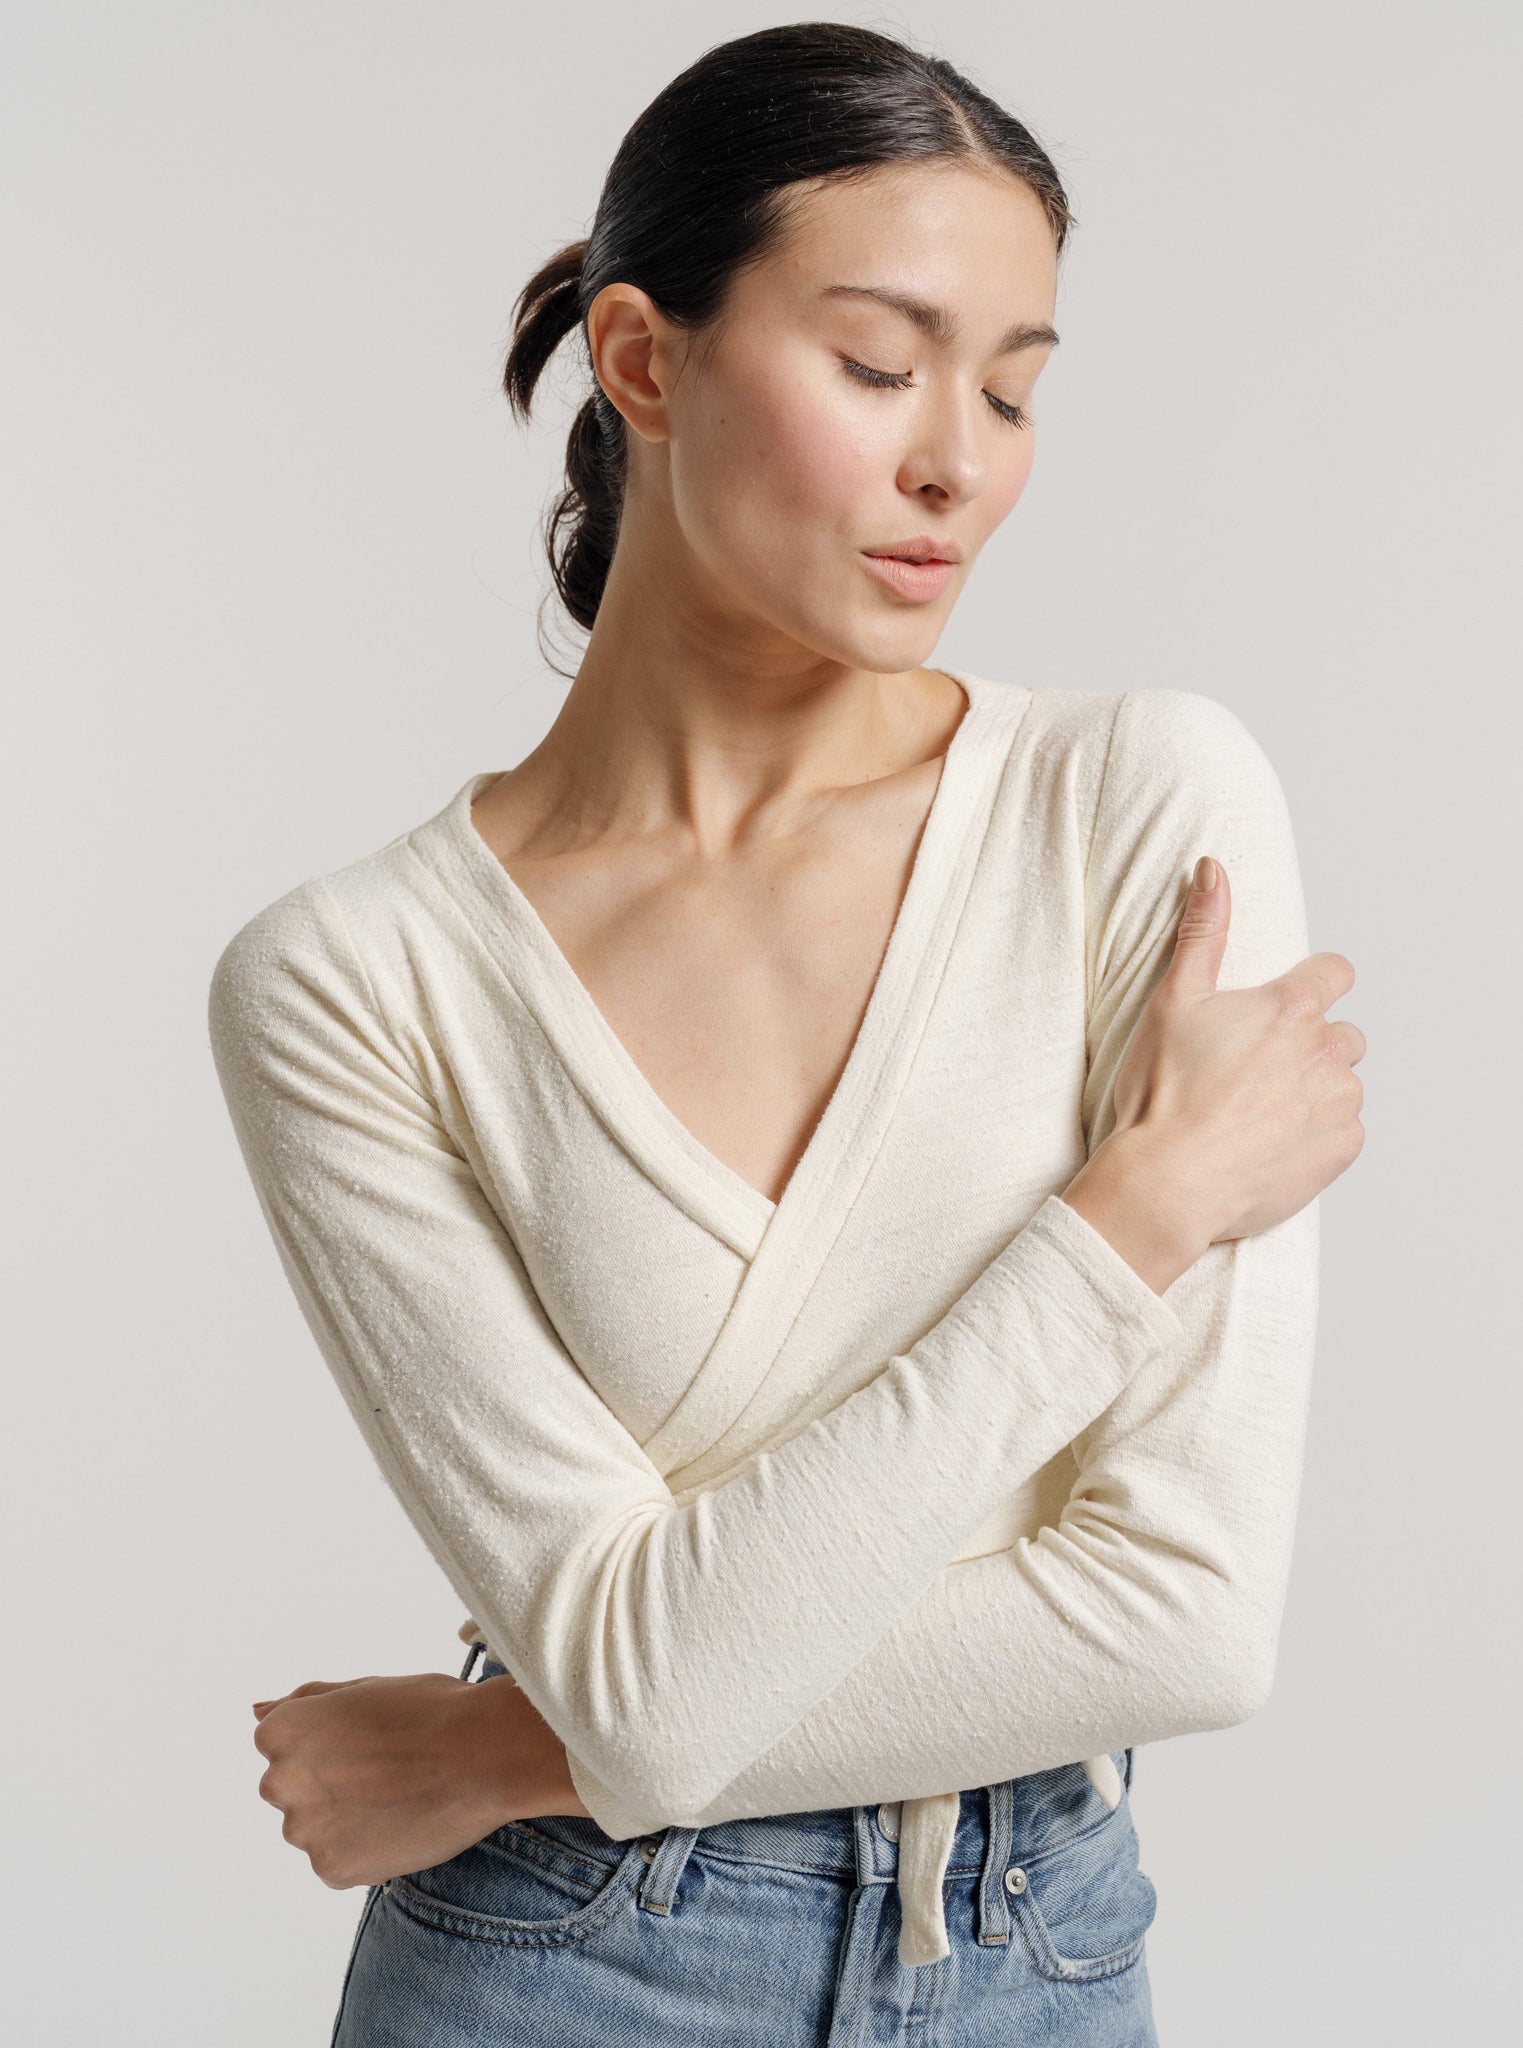 The model is wearing a Ballet Wrap Top - Ivory Silk Noil - Pre-order and jeans.